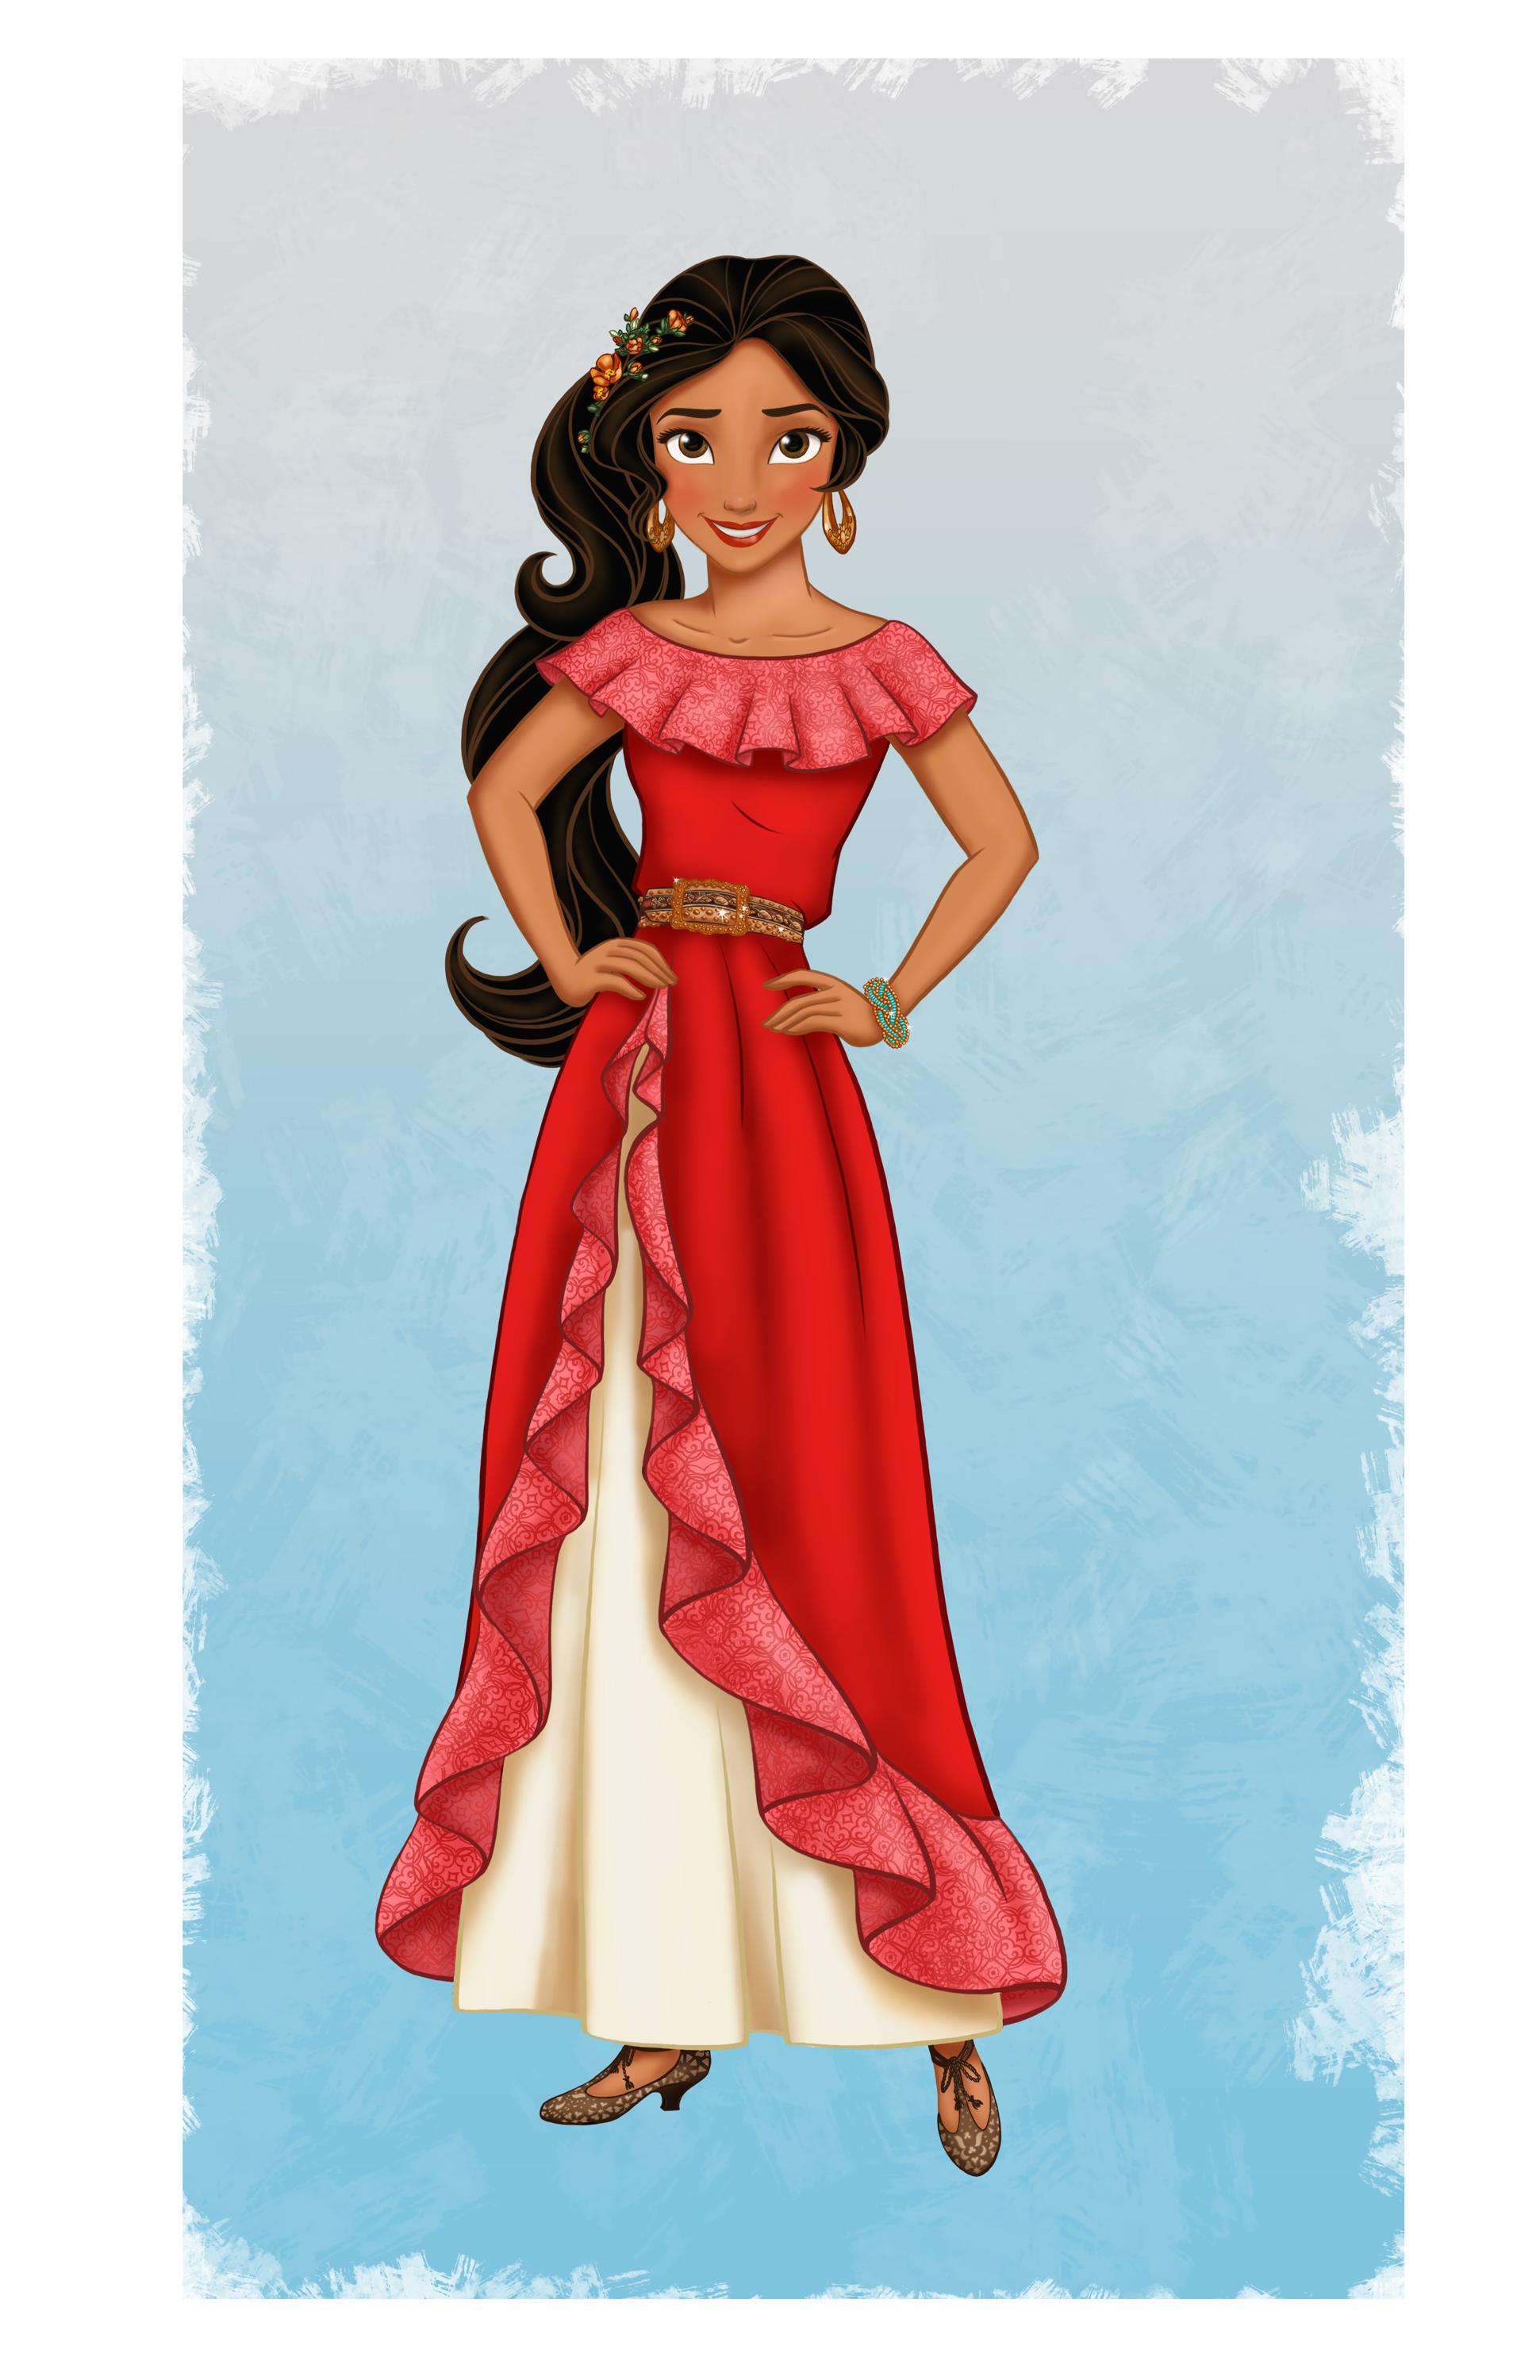 ELENA OF AVALOR - Princess Elena of Avalor, a confident and compassionate teenager in an enchanted fairytale kingdom inspired by diverse Latin cultures and folklore, will be introduced in a special episode of Disney Junior's hit series "Sofia the First" beginning production now for a 2016 premiere.  That exciting story arc will usher in the 2016 launch of the animated series "Elena of Avalor," a production of Disney Television Animation. (Disney Junior) PRINCESS ELENA OF AVALOR